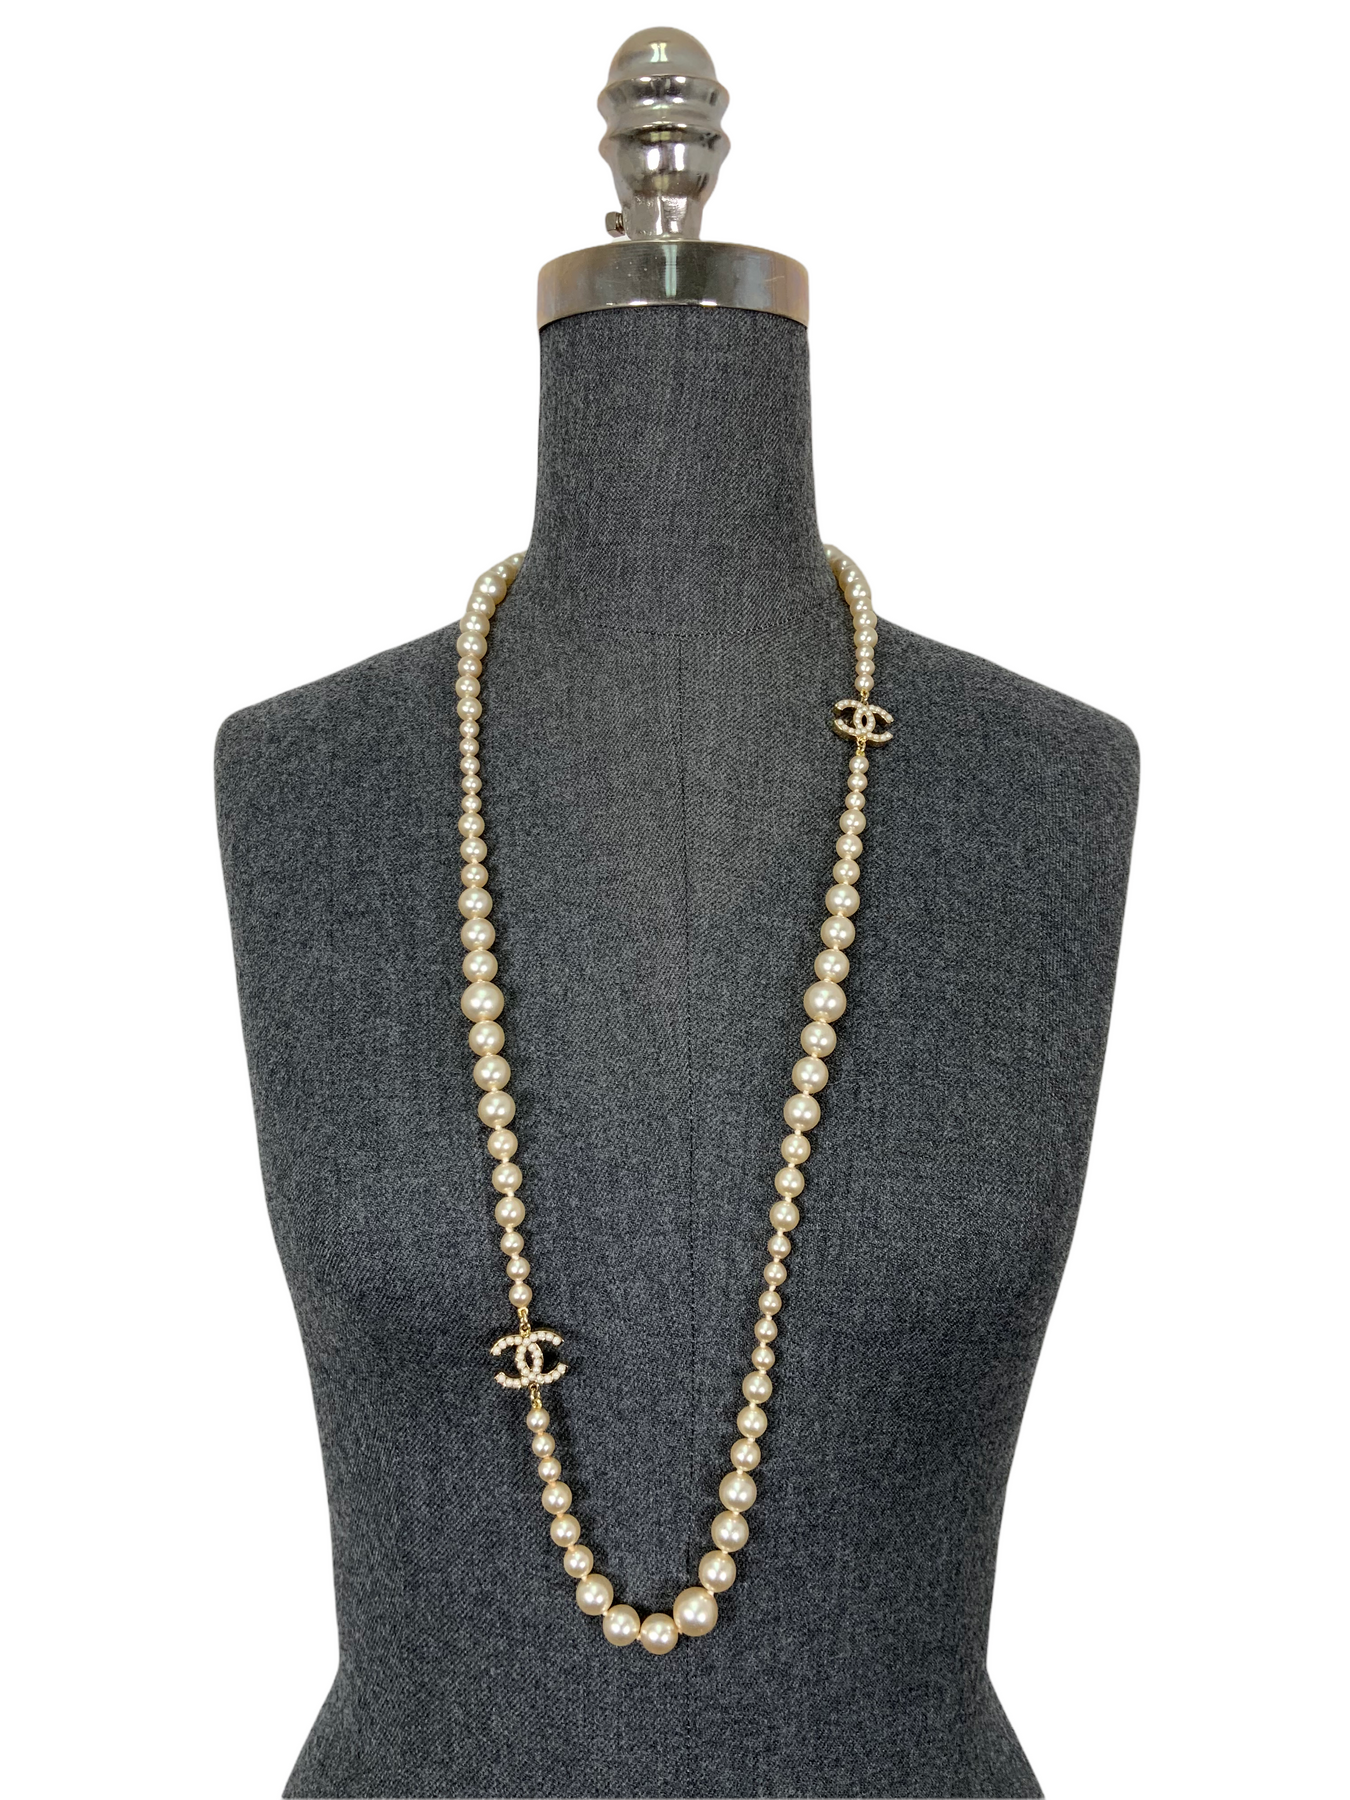 CHANEL CC Logo Timeless Classic Faux Pearl Necklace - Consigned